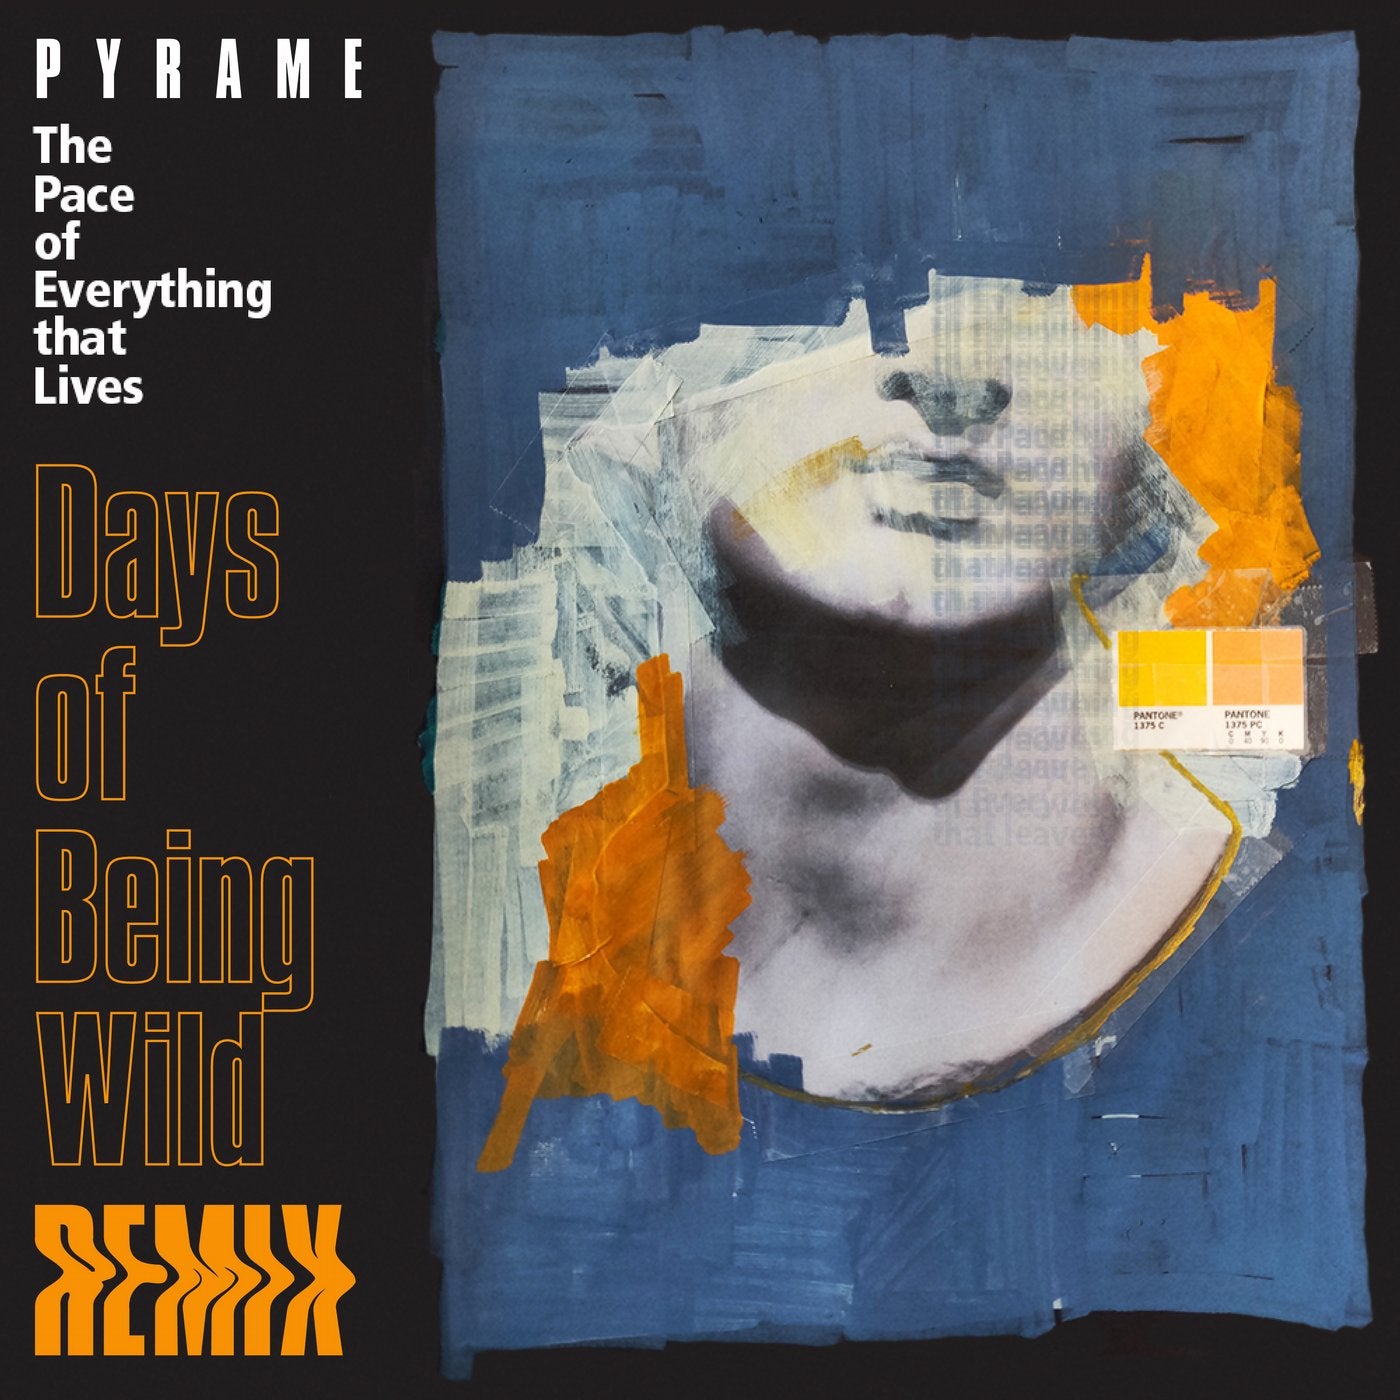 The Pace of Everything that Lives (Days of Being Wild Remix)